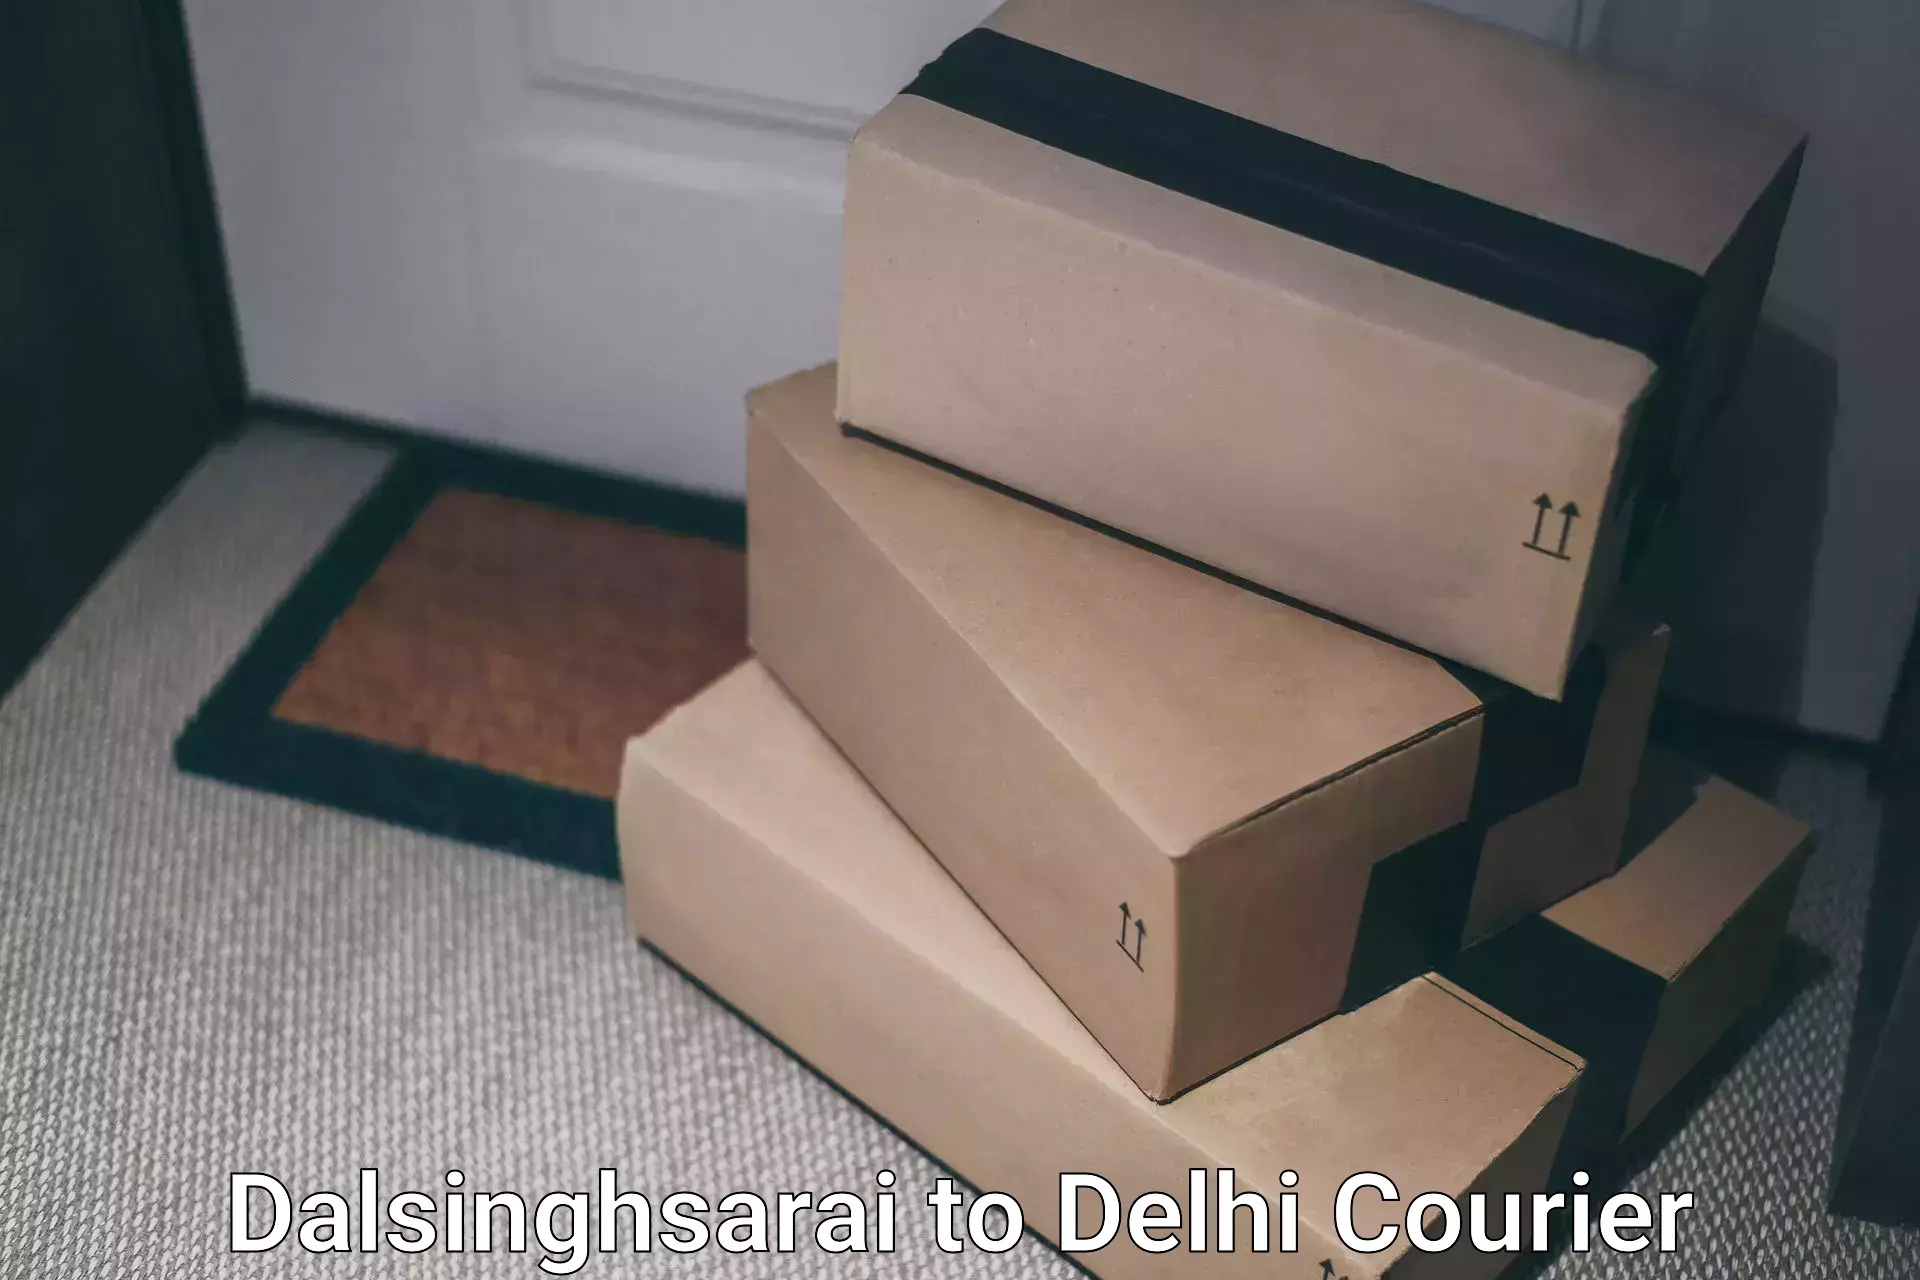 Automated shipping processes Dalsinghsarai to Lodhi Road